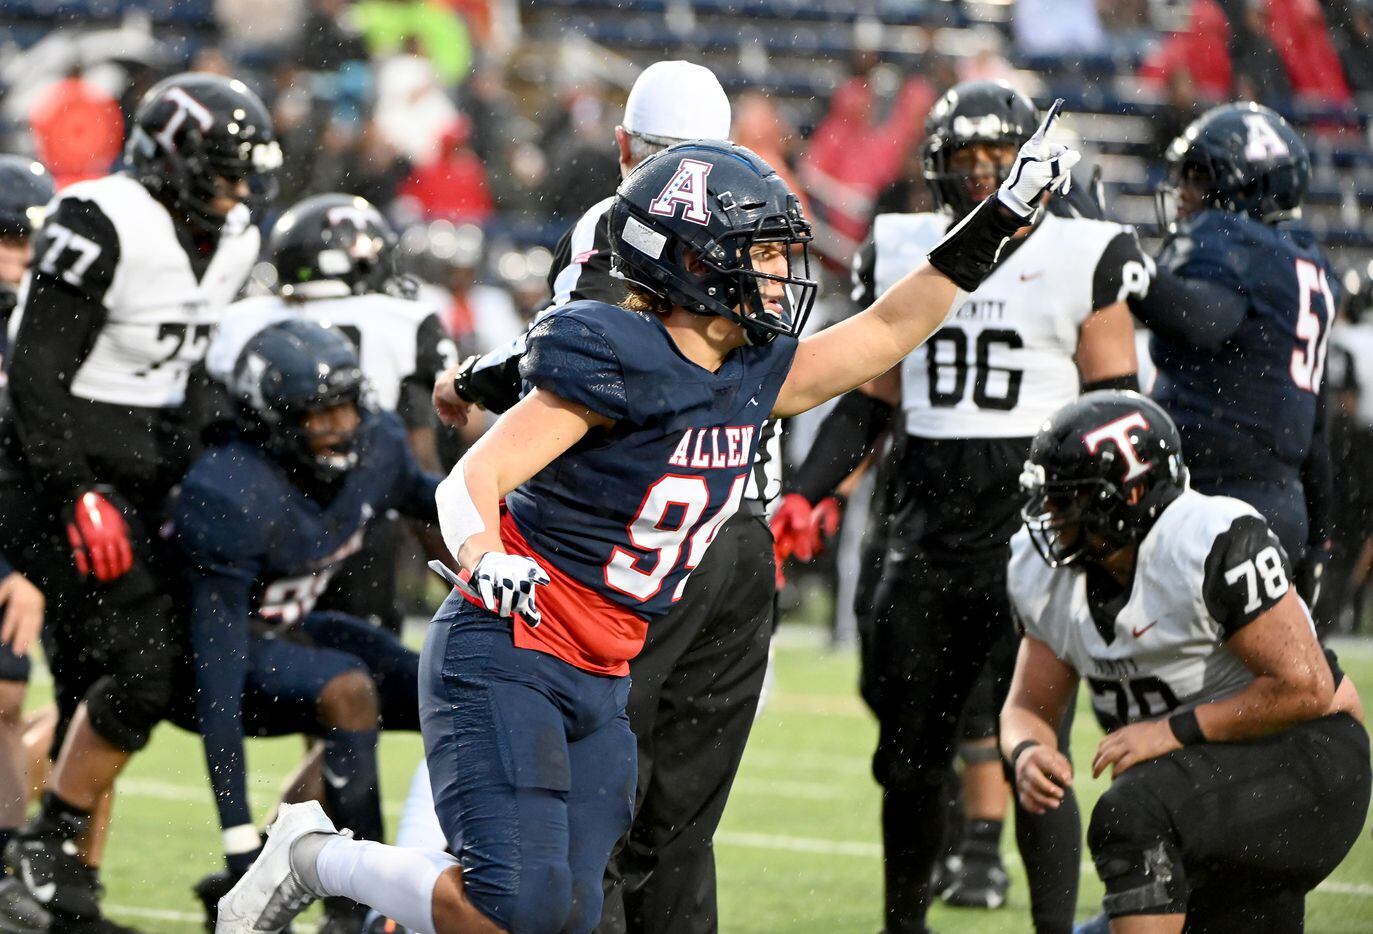 Allen’s Gabriel Milagres (94) celebrates after a fumble recovery in the second half of Class 6A Division I Region I semifinal playoff game between Allen and Euless Trinity, Saturday, Nov. 27, 2021, in Allen, Texas. (Matt Strasen/Special Contributor)